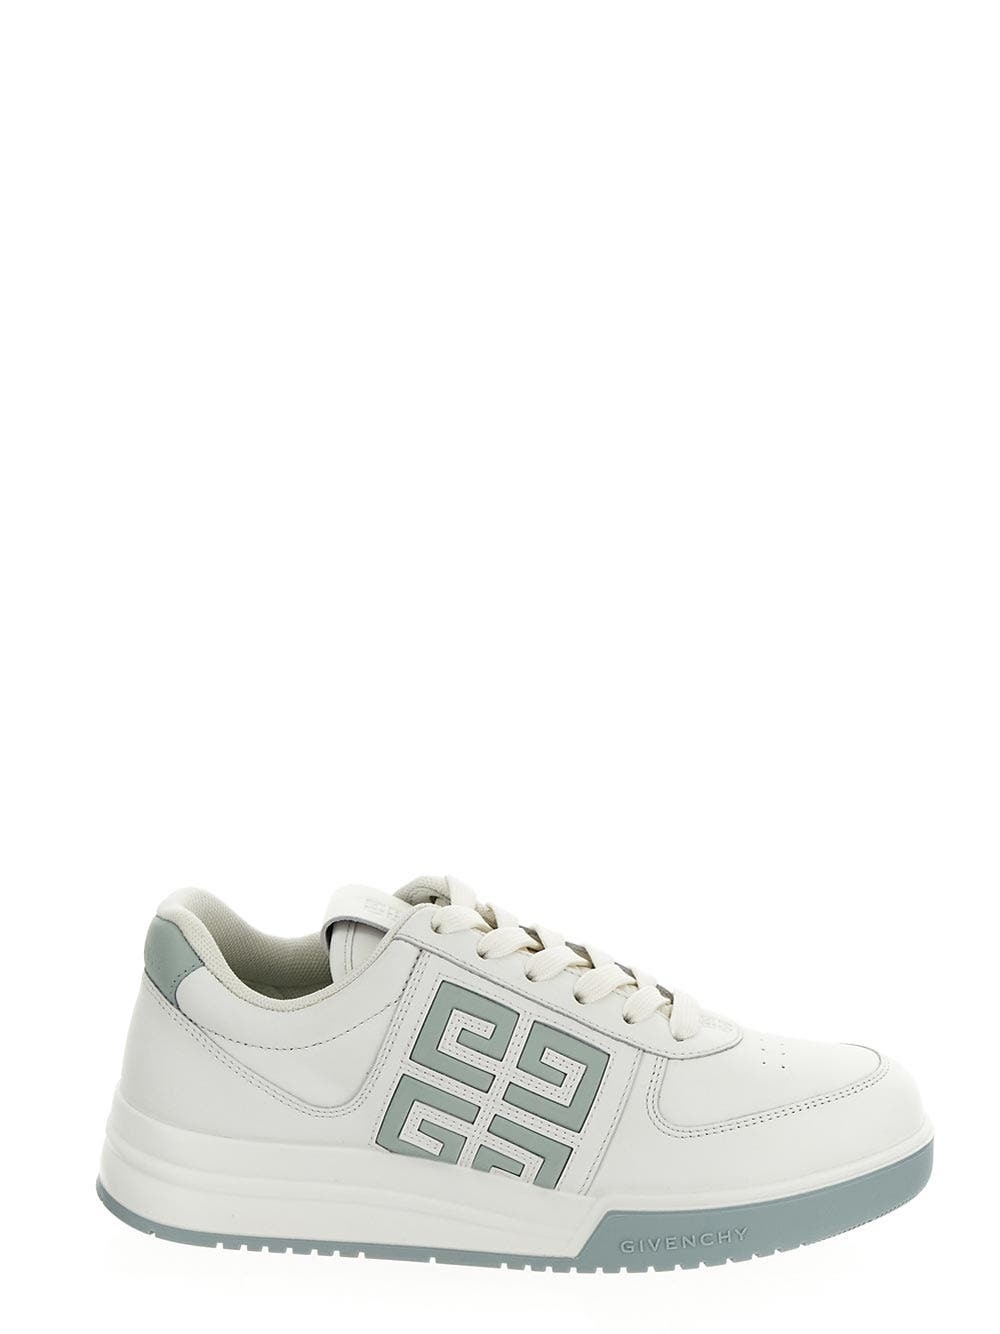 Photo: Givenchy G4 Sneakers